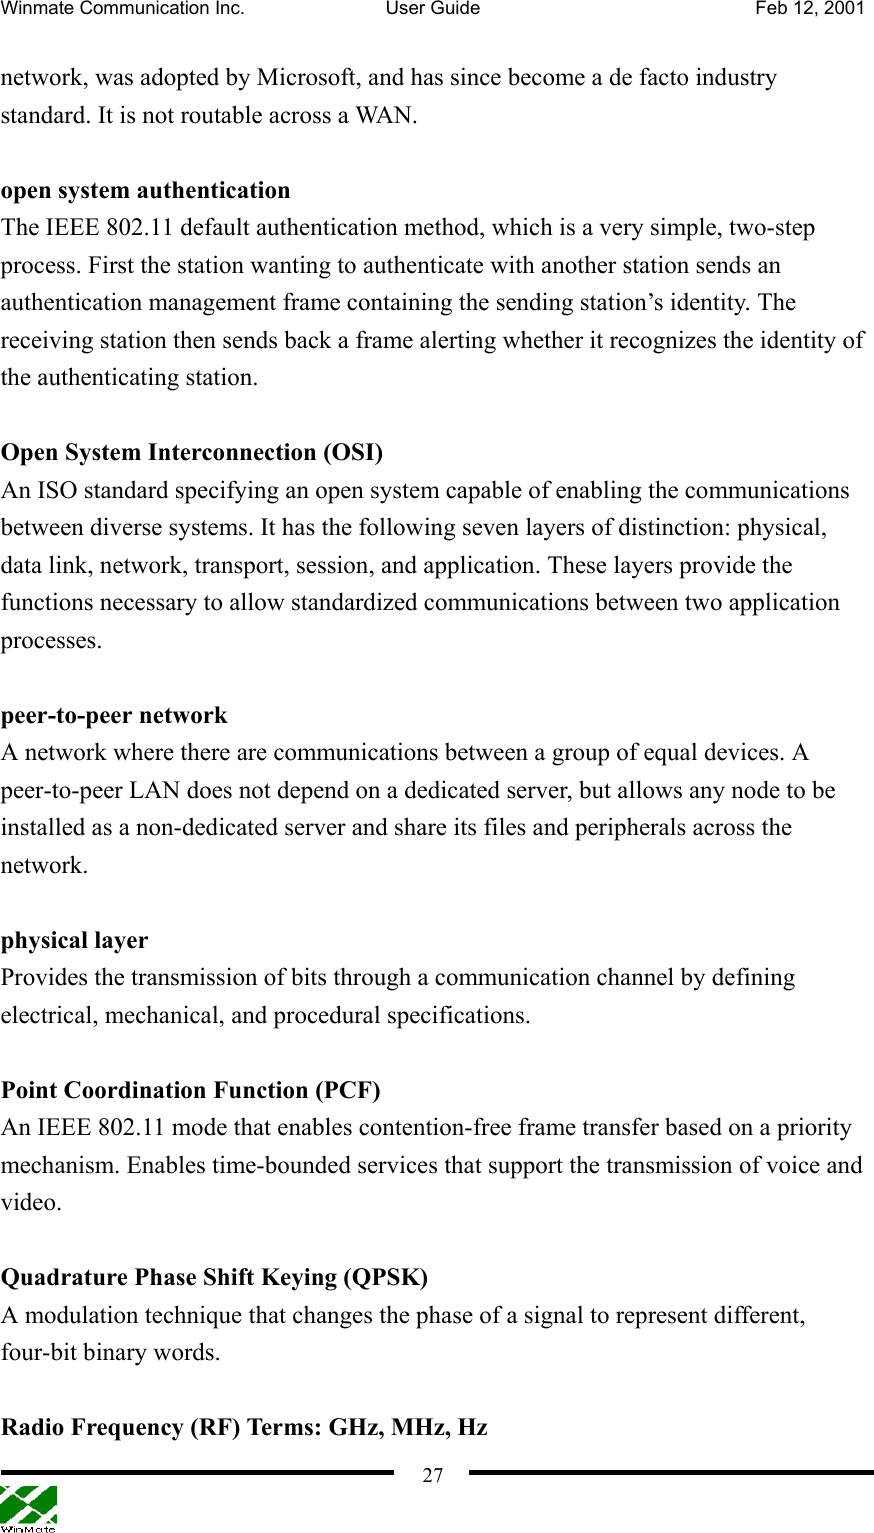 Winmate Communication Inc.  User Guide  Feb 12, 2001    27network, was adopted by Microsoft, and has since become a de facto industry standard. It is not routable across a WAN.  open system authentication The IEEE 802.11 default authentication method, which is a very simple, two-step process. First the station wanting to authenticate with another station sends an authentication management frame containing the sending station’s identity. The receiving station then sends back a frame alerting whether it recognizes the identity of the authenticating station.  Open System Interconnection (OSI) An ISO standard specifying an open system capable of enabling the communications between diverse systems. It has the following seven layers of distinction: physical, data link, network, transport, session, and application. These layers provide the functions necessary to allow standardized communications between two application processes.  peer-to-peer network A network where there are communications between a group of equal devices. A peer-to-peer LAN does not depend on a dedicated server, but allows any node to be installed as a non-dedicated server and share its files and peripherals across the network.   physical layer Provides the transmission of bits through a communication channel by defining electrical, mechanical, and procedural specifications.  Point Coordination Function (PCF) An IEEE 802.11 mode that enables contention-free frame transfer based on a priority mechanism. Enables time-bounded services that support the transmission of voice and video.  Quadrature Phase Shift Keying (QPSK) A modulation technique that changes the phase of a signal to represent different, four-bit binary words.  Radio Frequency (RF) Terms: GHz, MHz, Hz 